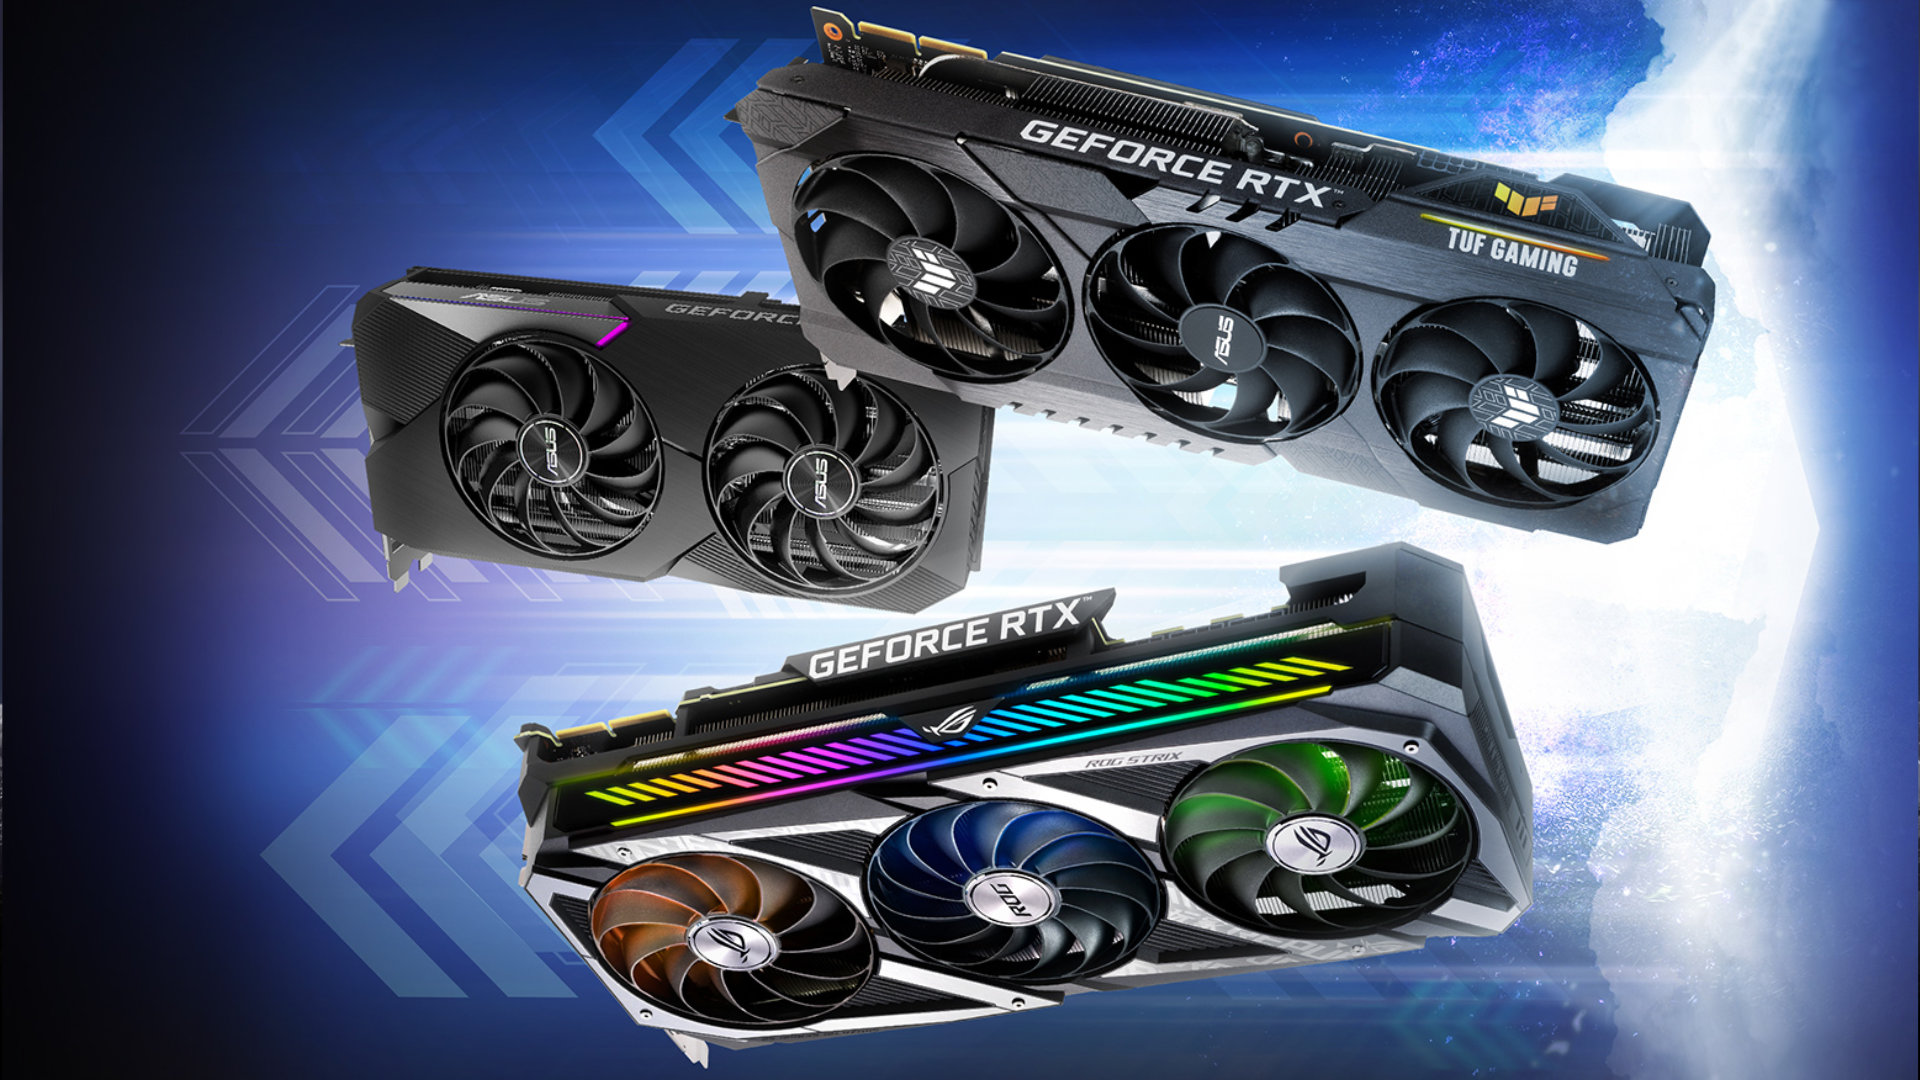 The Nvidia RTX 3080 Super could be coming to gaming PCs as well as laptops